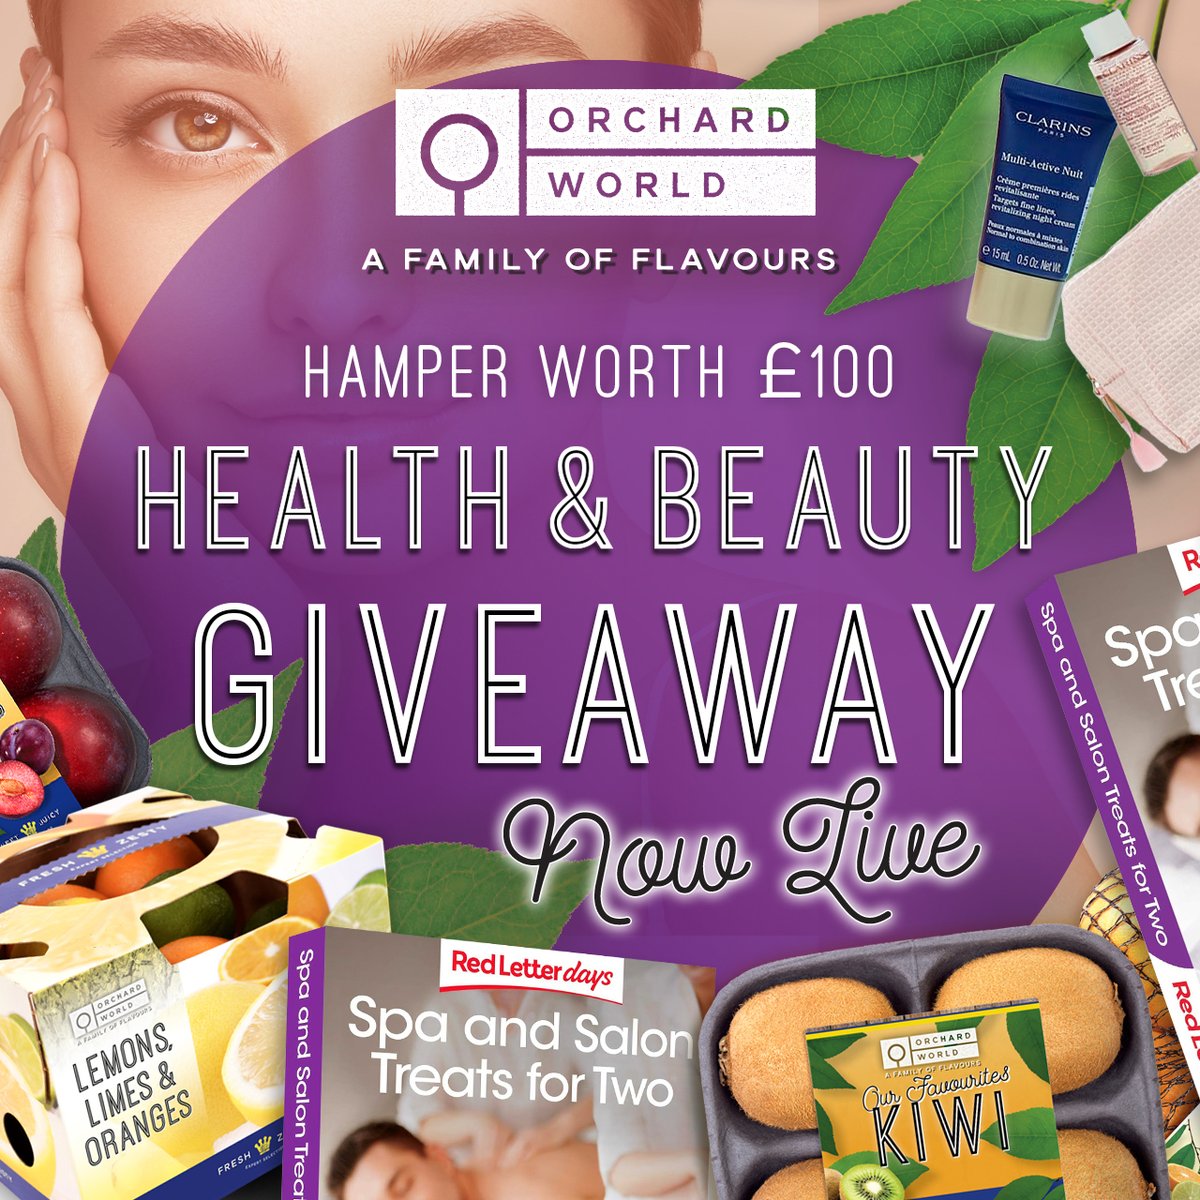 A fantastic bundle to be won in our OrchardWorld ‘Health and Beauty’ hamper giveaway: a touch of Clarins, and a dose of L’Oréal Paris alongside a scrumptious selection of our very own OrchardWorld seasonal fruit, this hamper will really get your heart racing. To top it off, you…